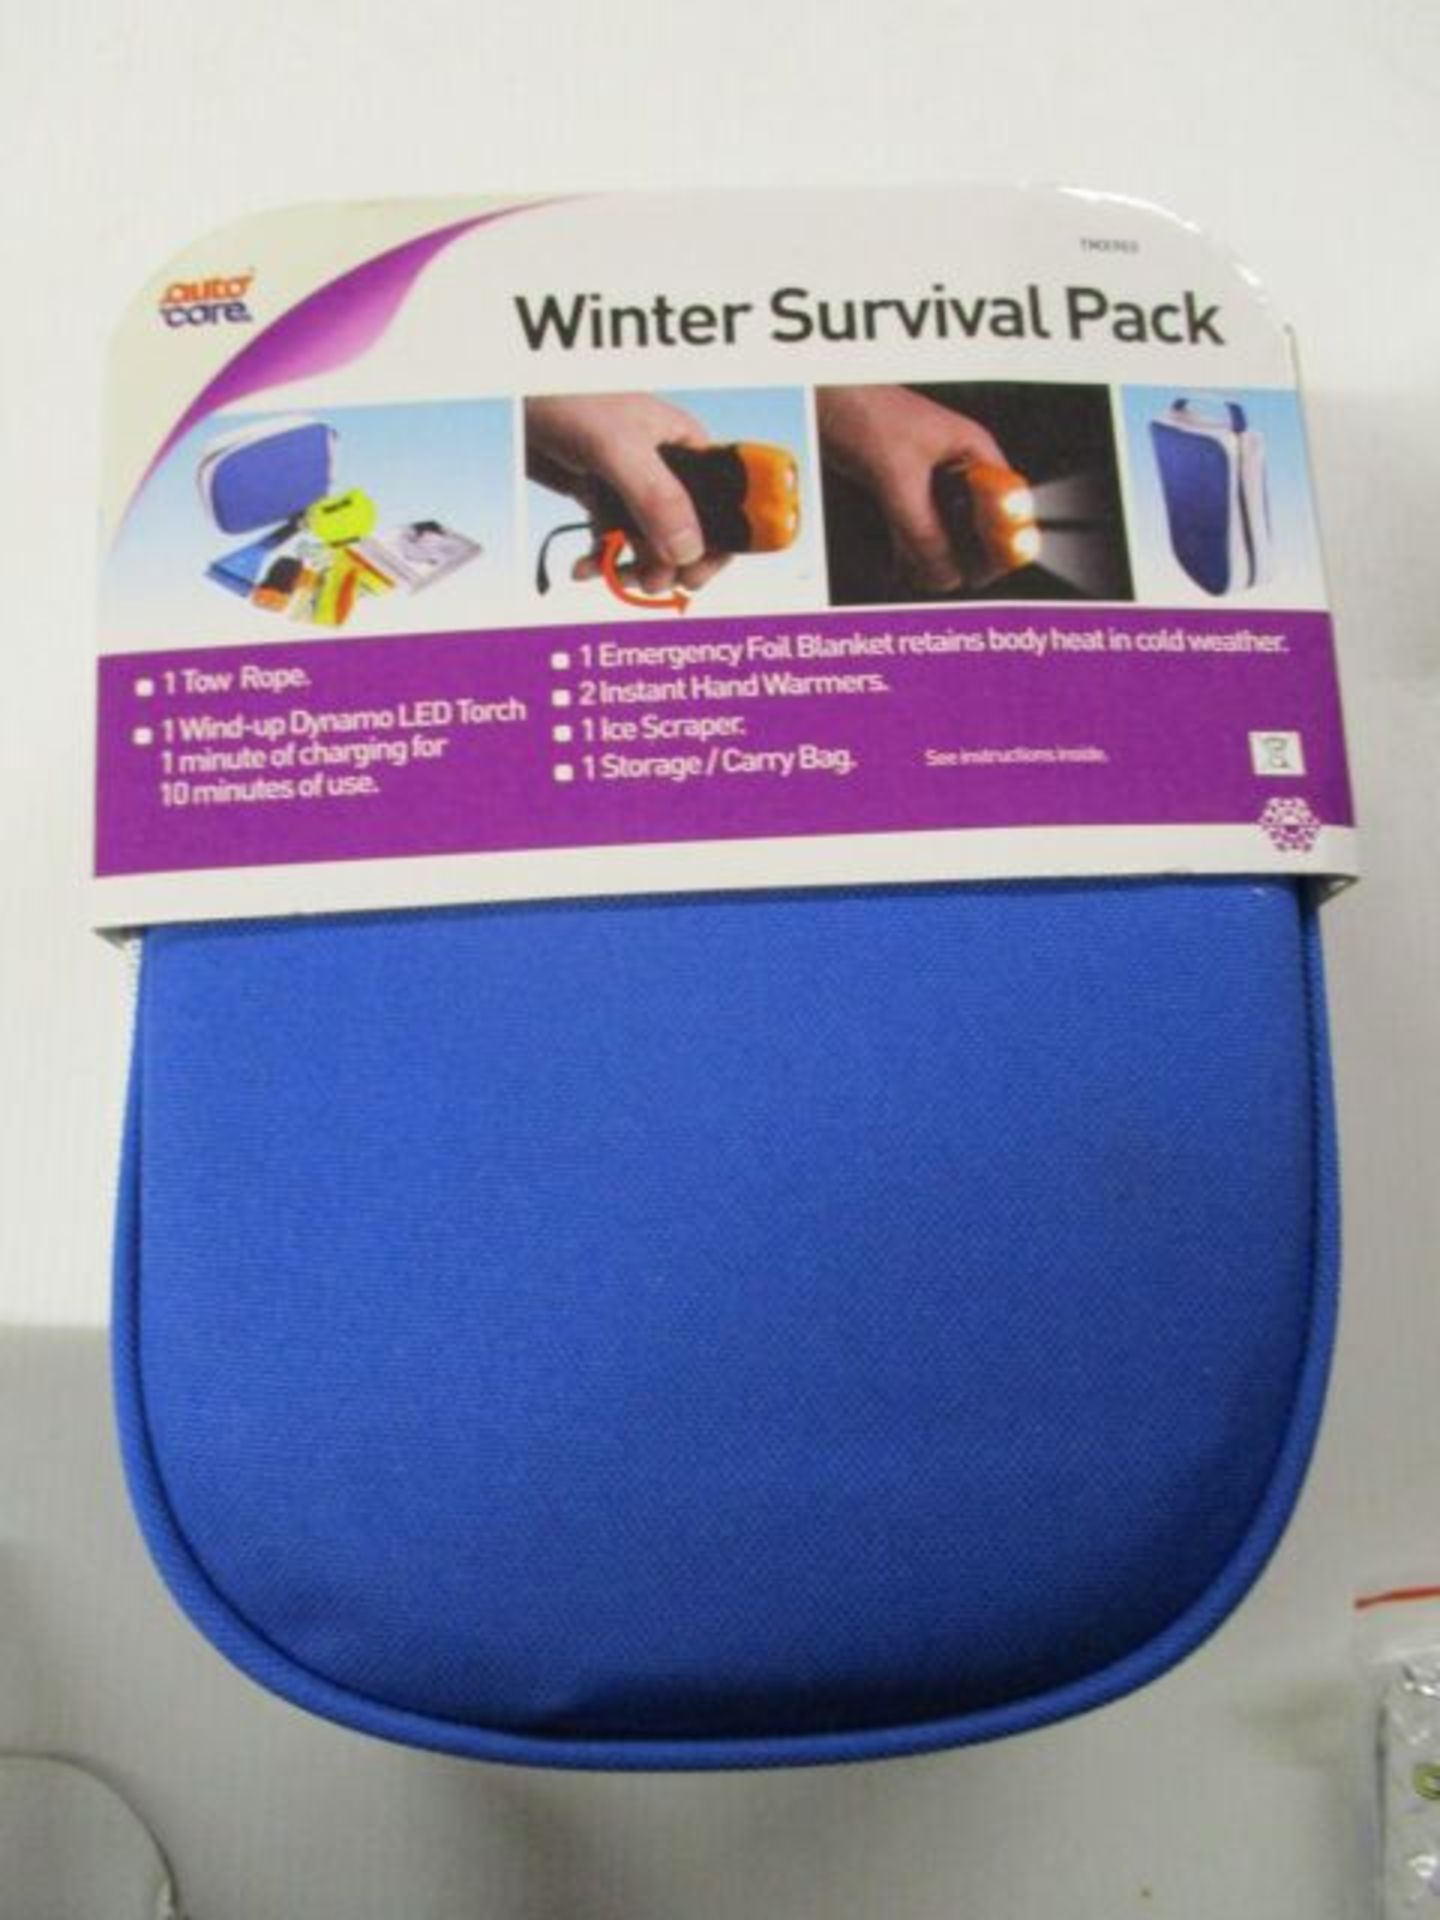 4pcs . x Brand new AutoCare winter car essentials kit - includes Tow Rope , Torch , Heat Blanket ,